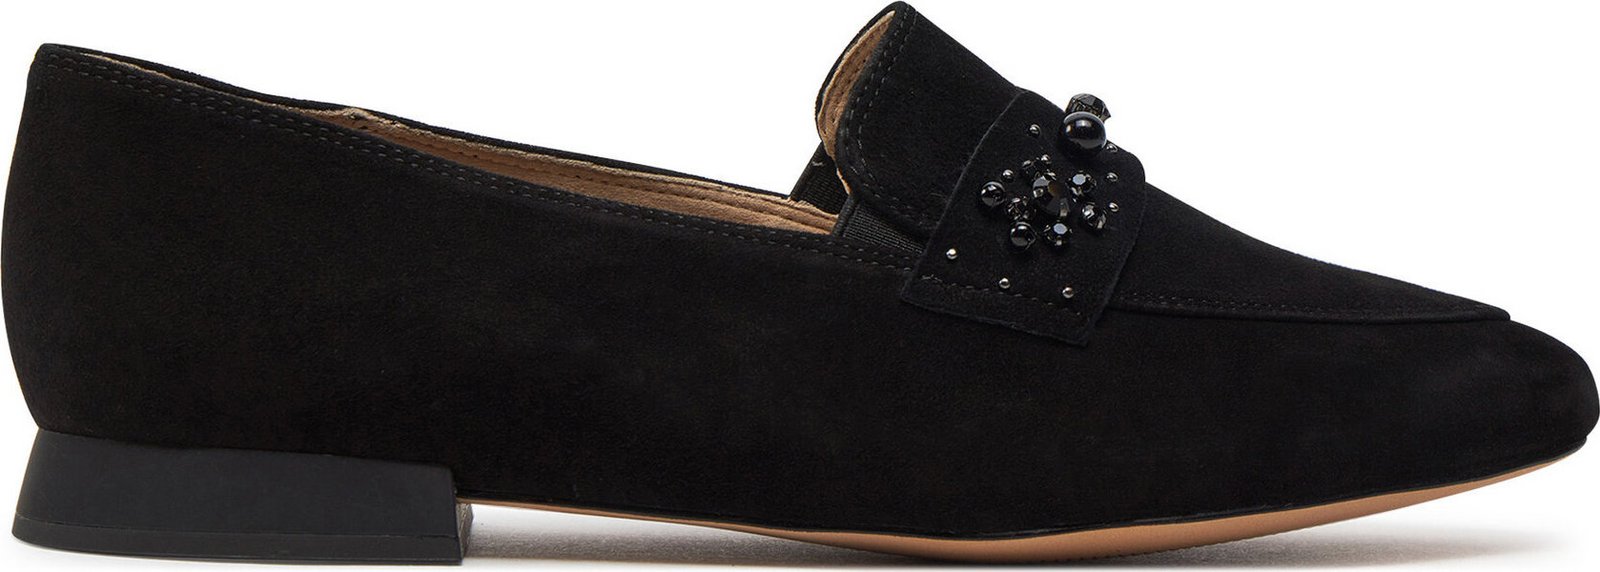 Lordsy Caprice 9-24203-42 Black Suede 004